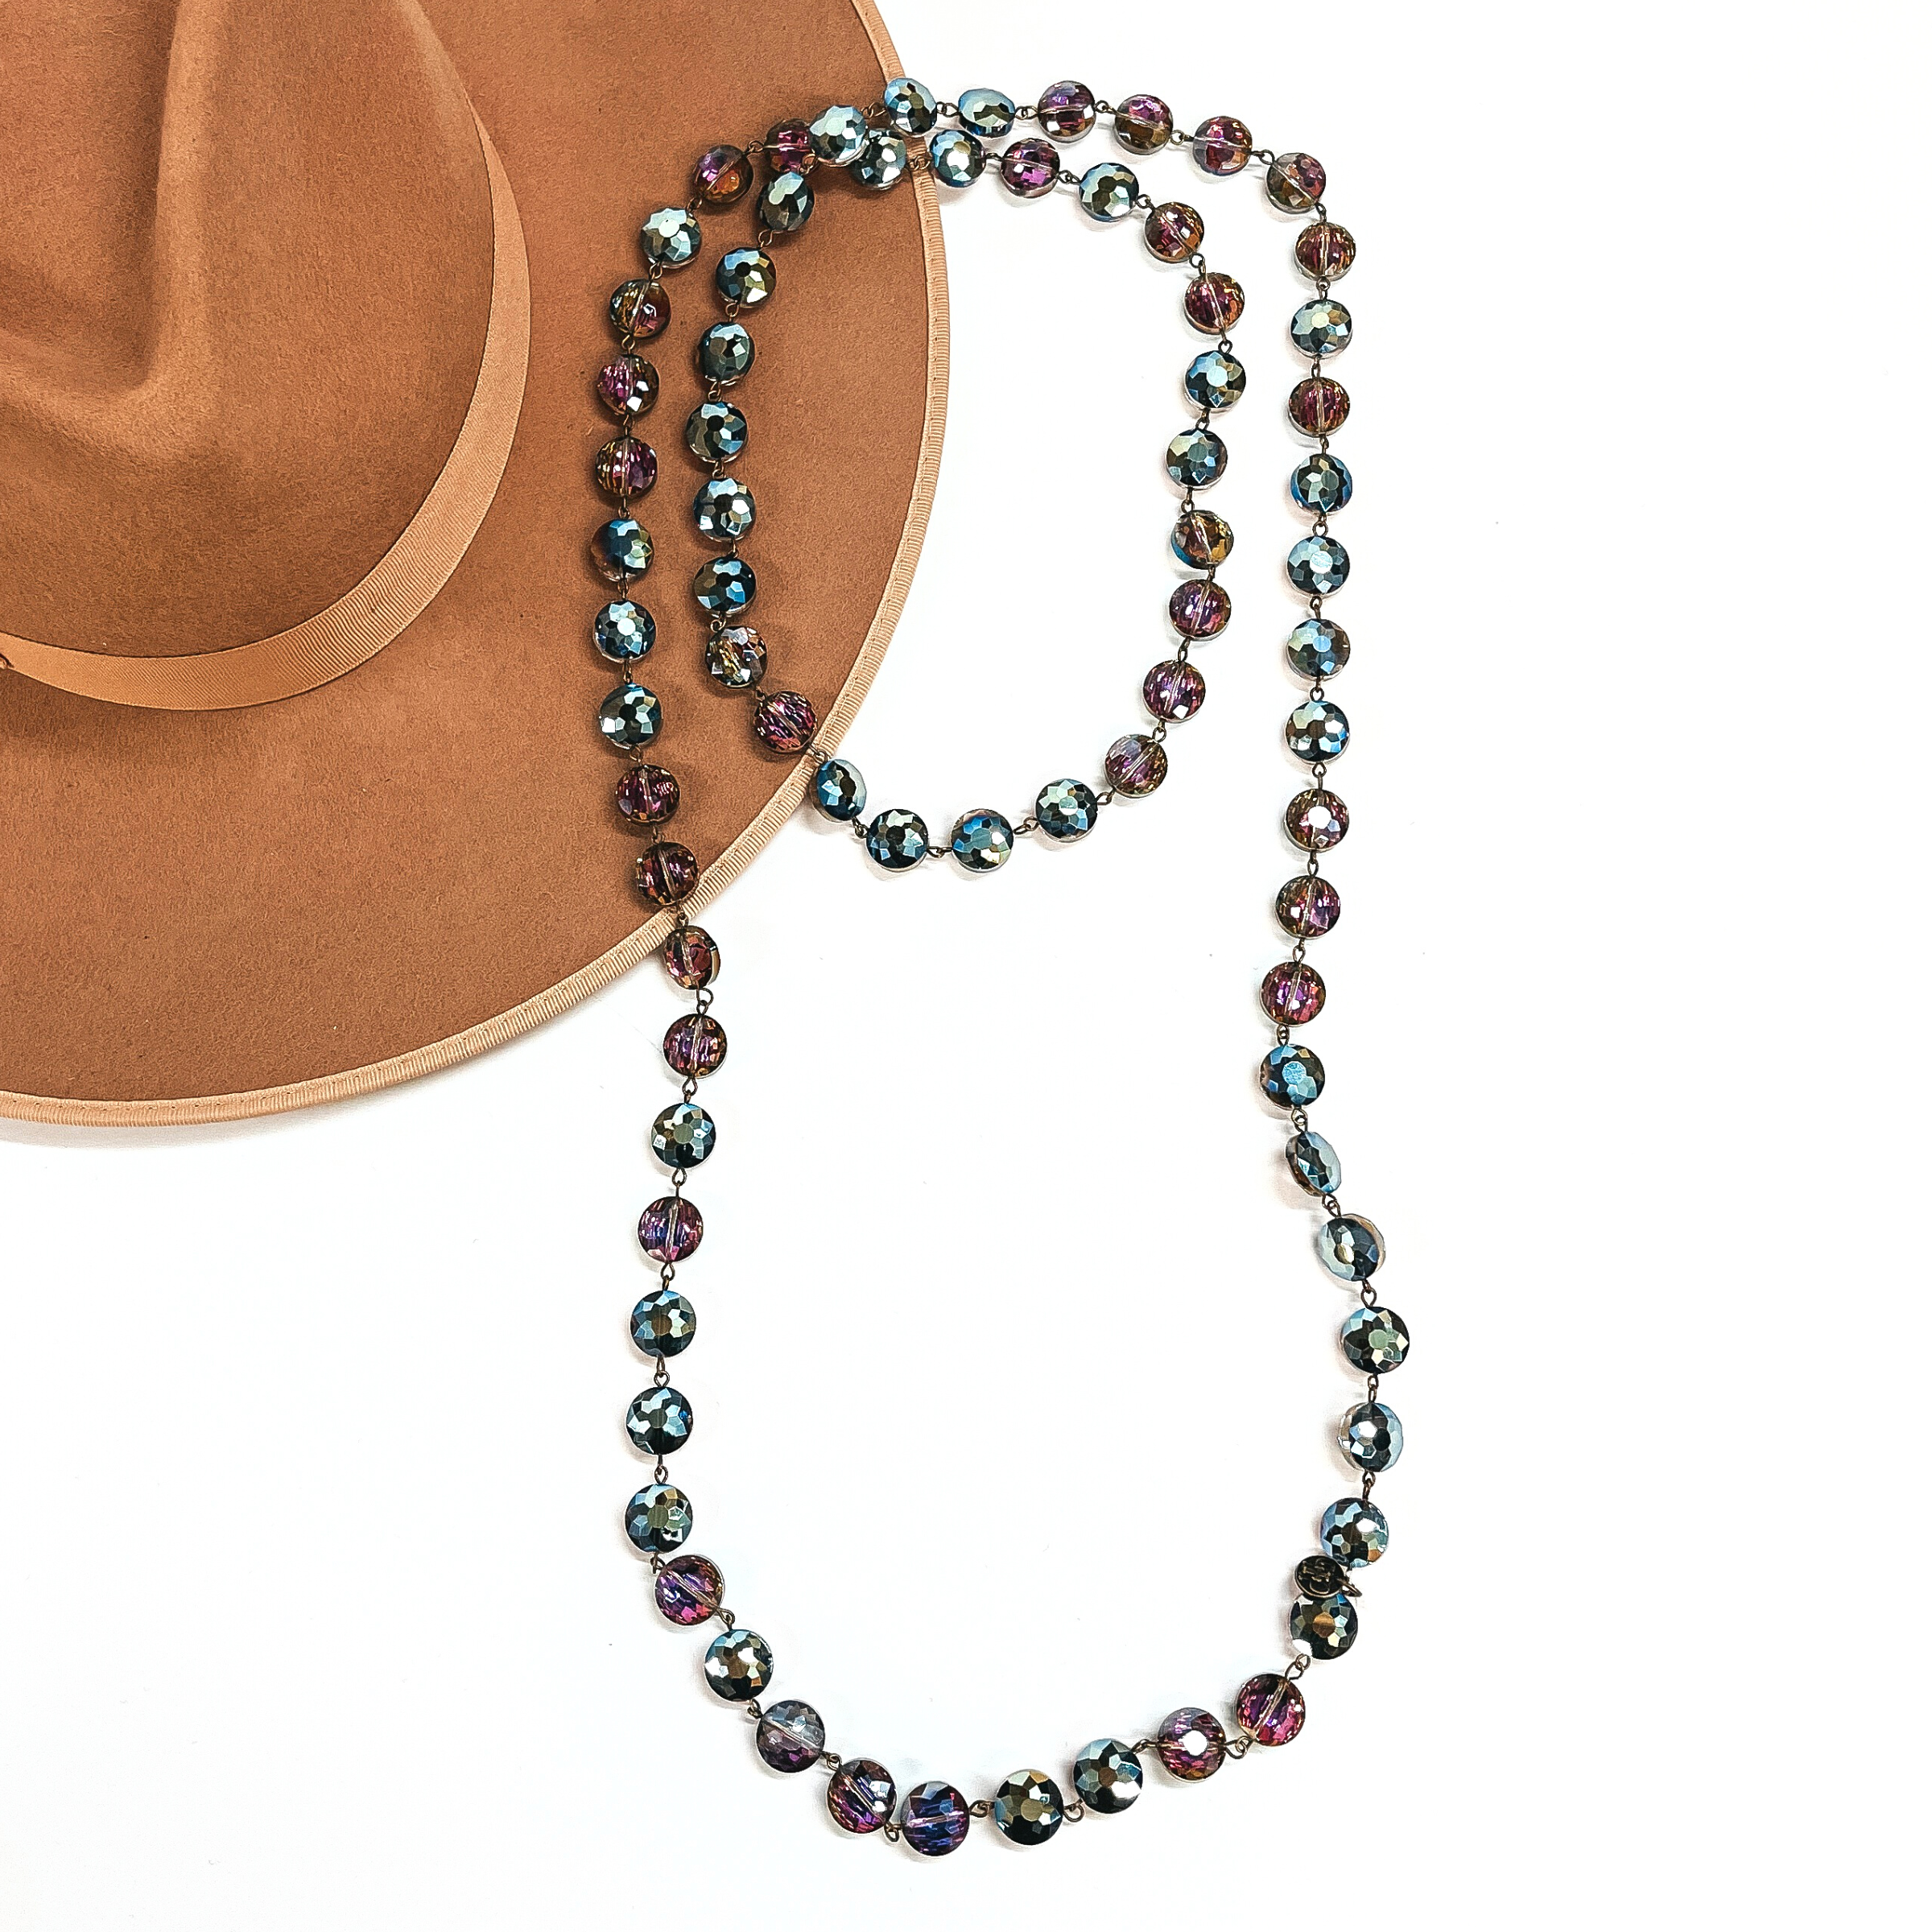 This is a long beaded necklace with bronze links connecting the beads. They have flat  round beads in rainbow. This necklace is taken on a camel brown felt hat and on a  white background.